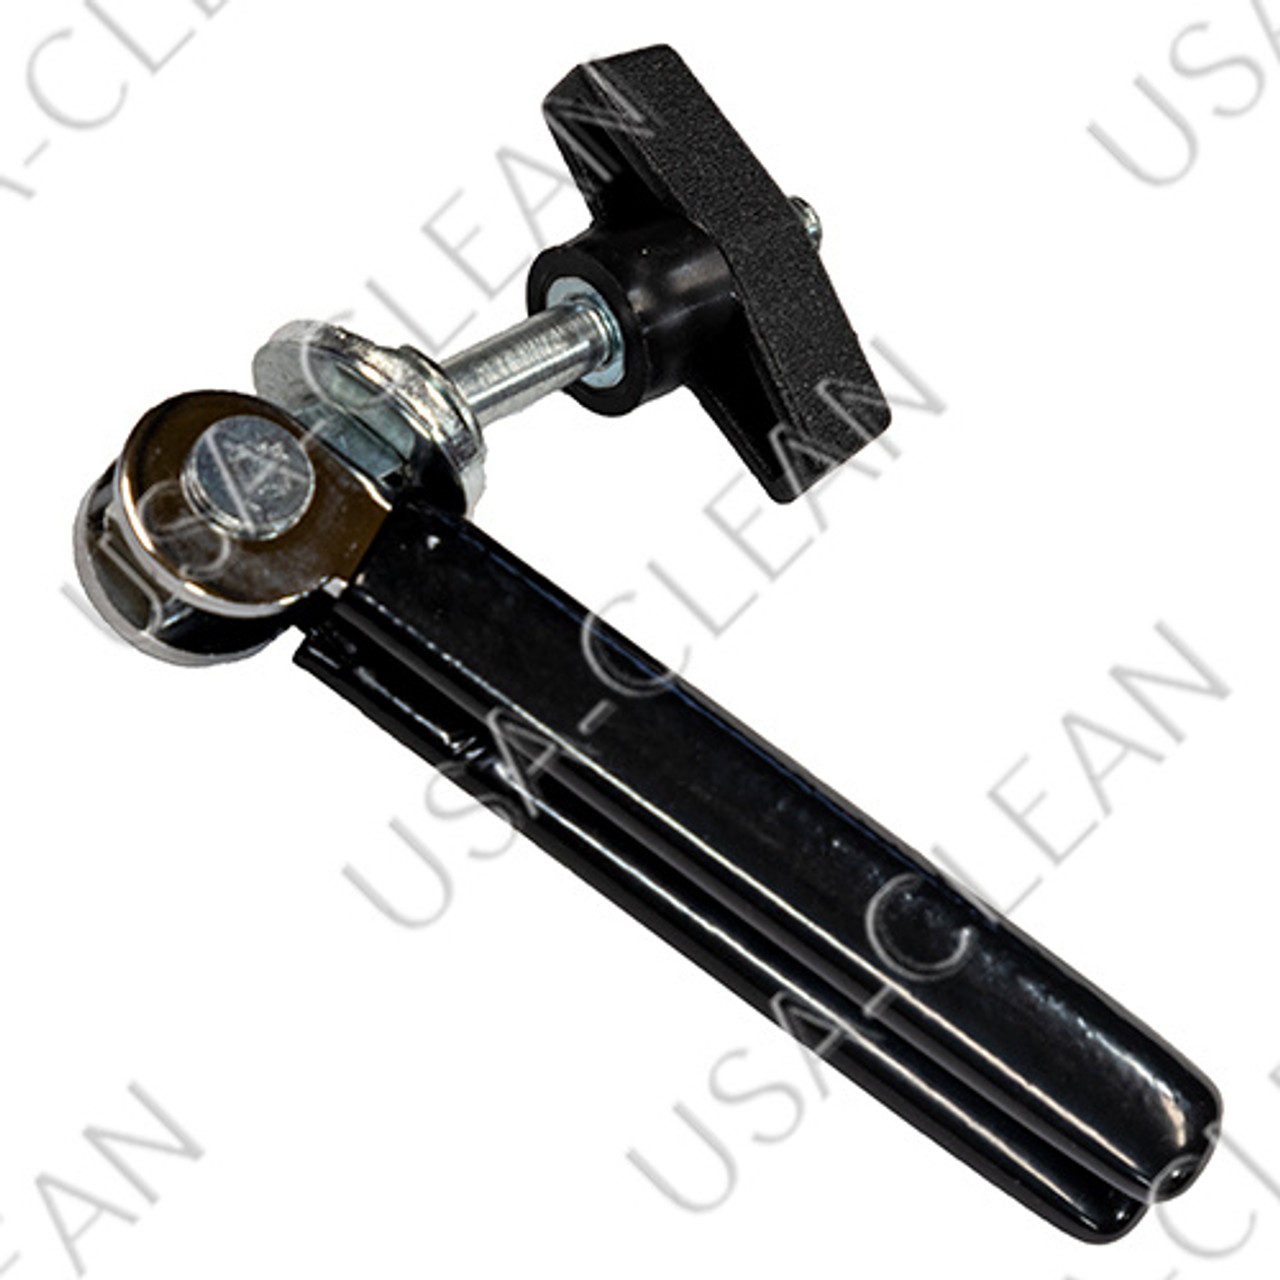 Handle clamp assembly 190-0008